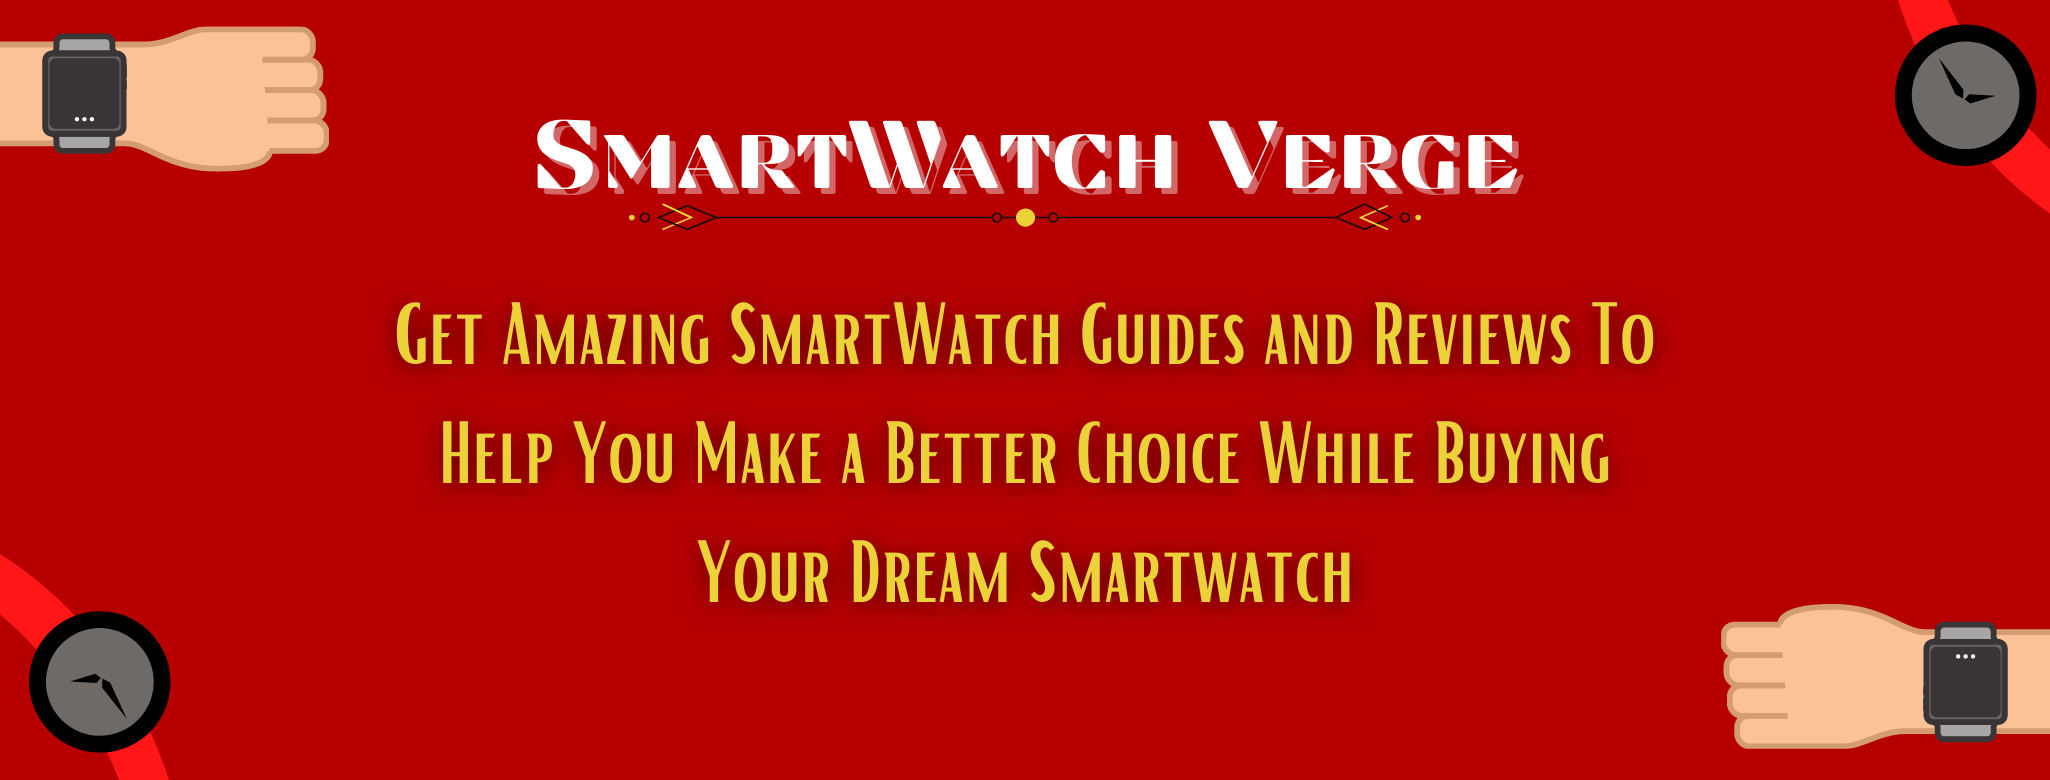 Smartwatch Verge | Smartwatches For Smart People